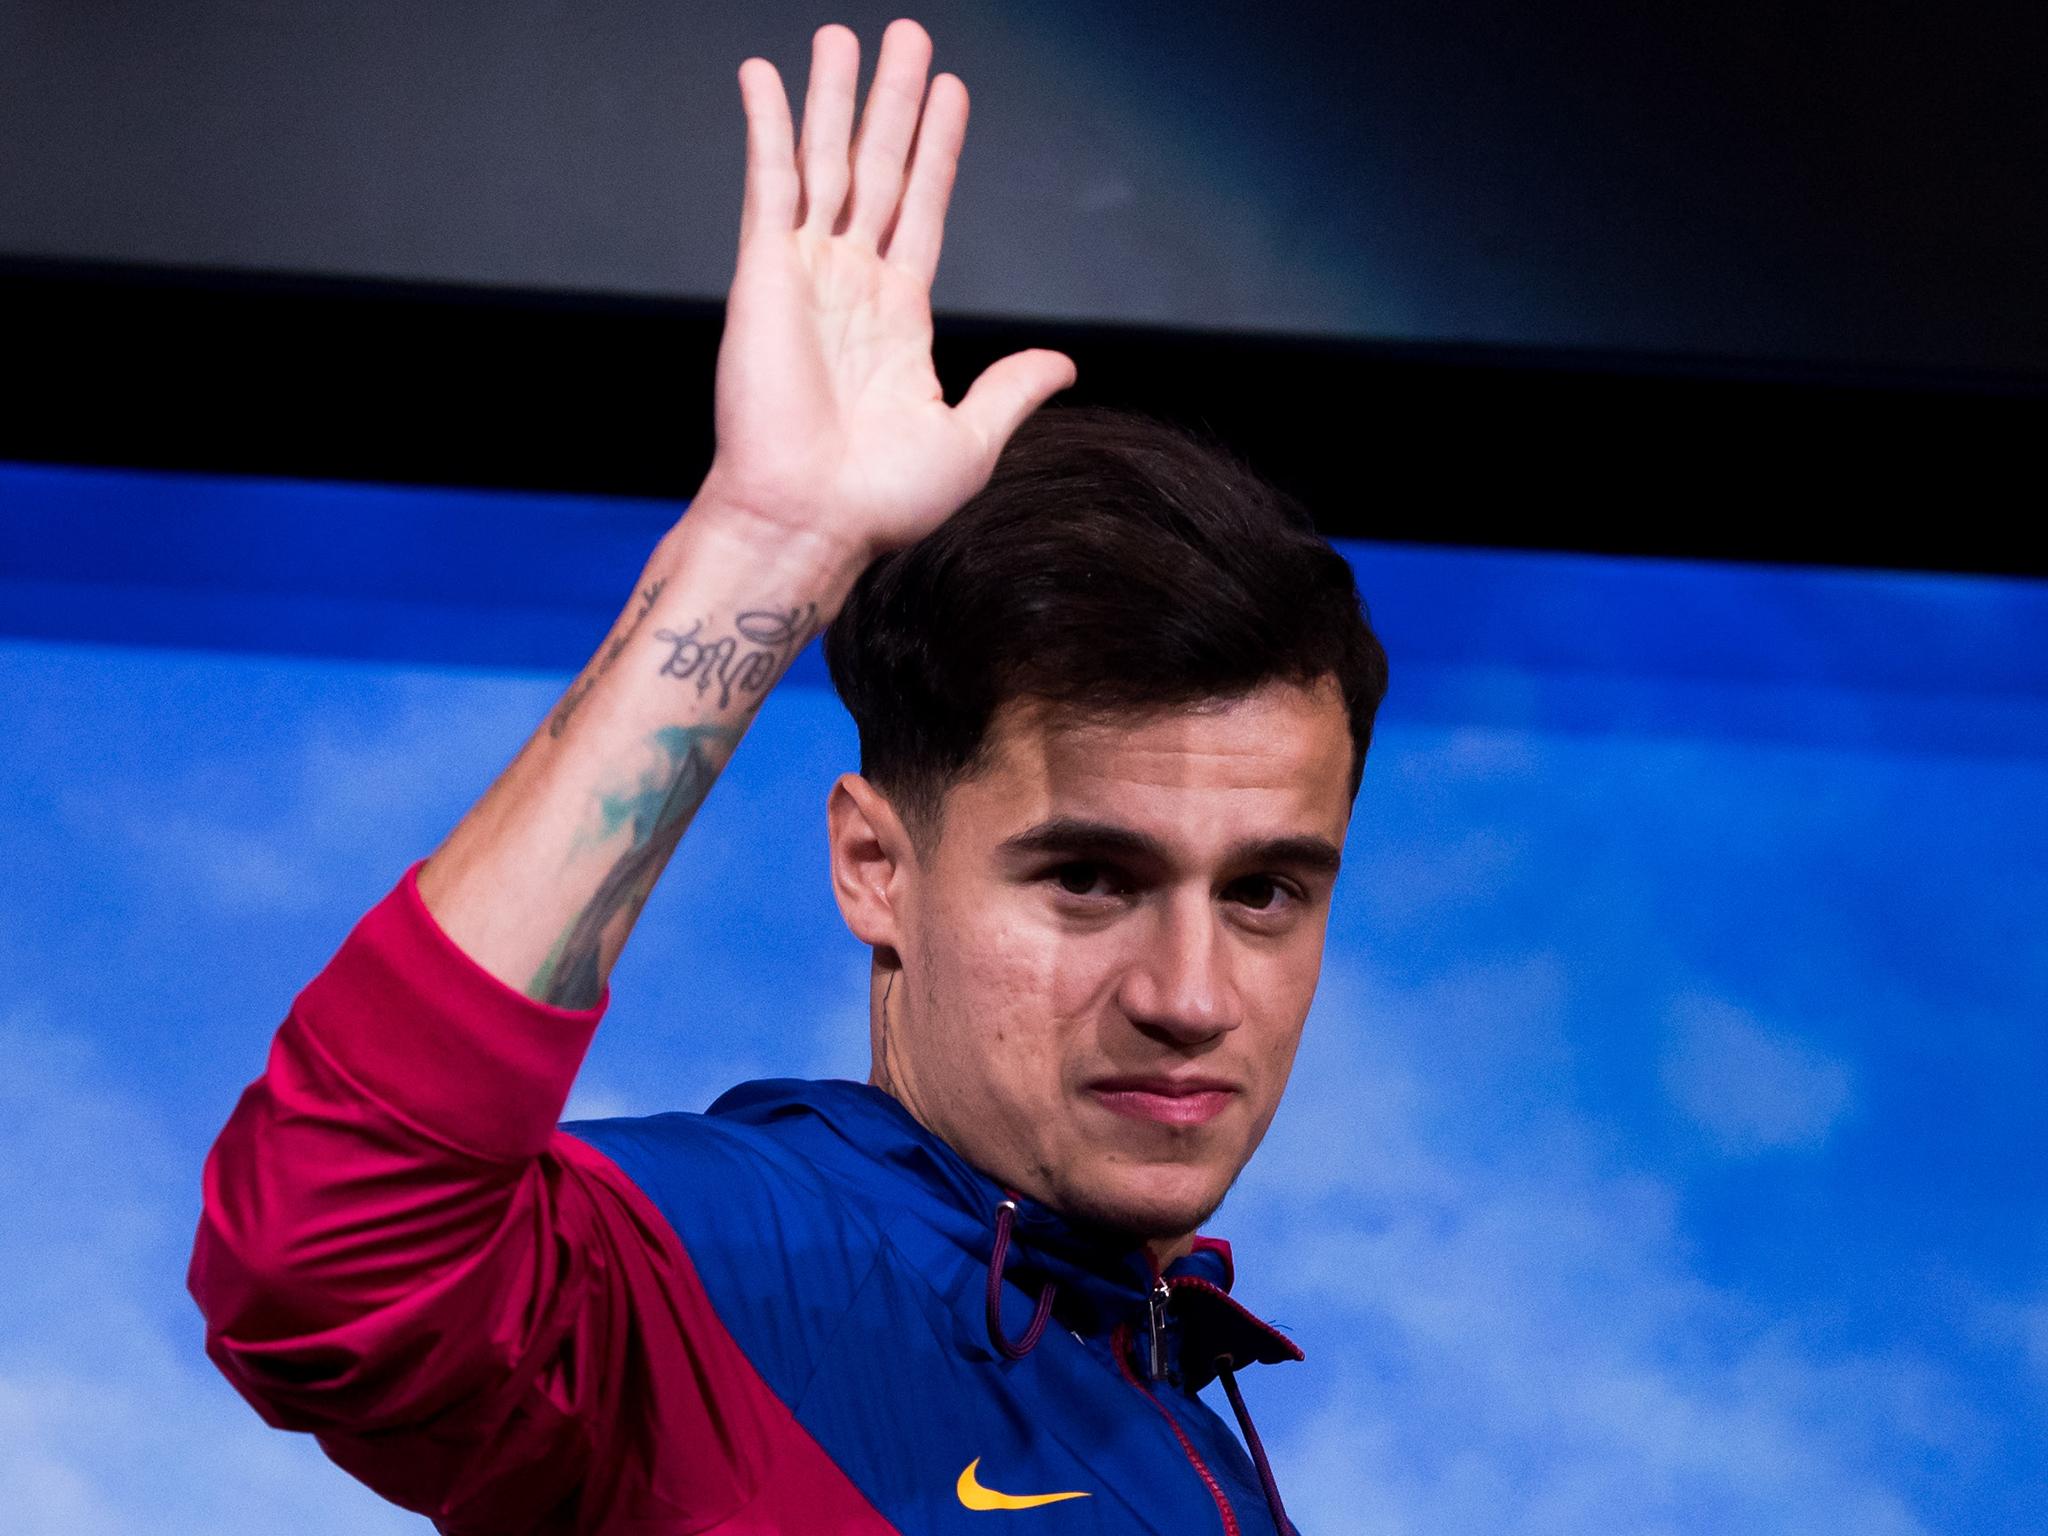 Philippe Coutinho has spoken for the first time since joining Barcelona